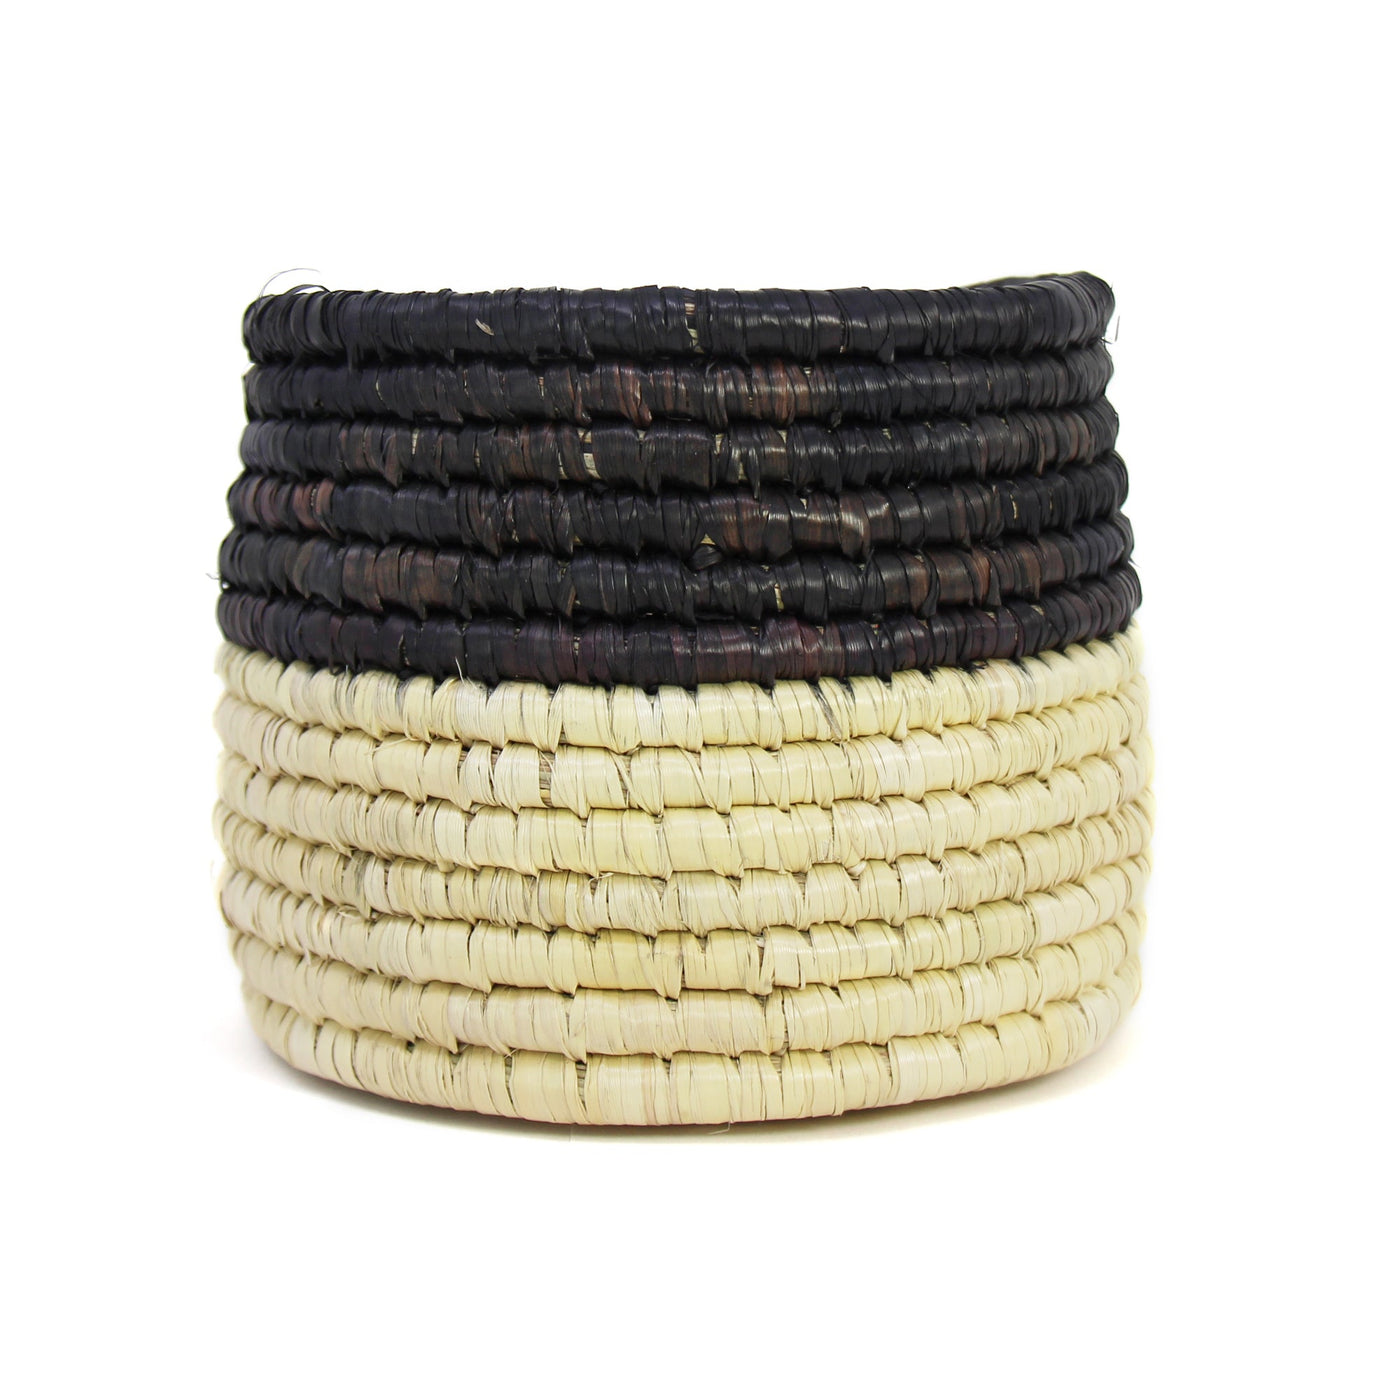 Dried Grass Basket, Black and Natural